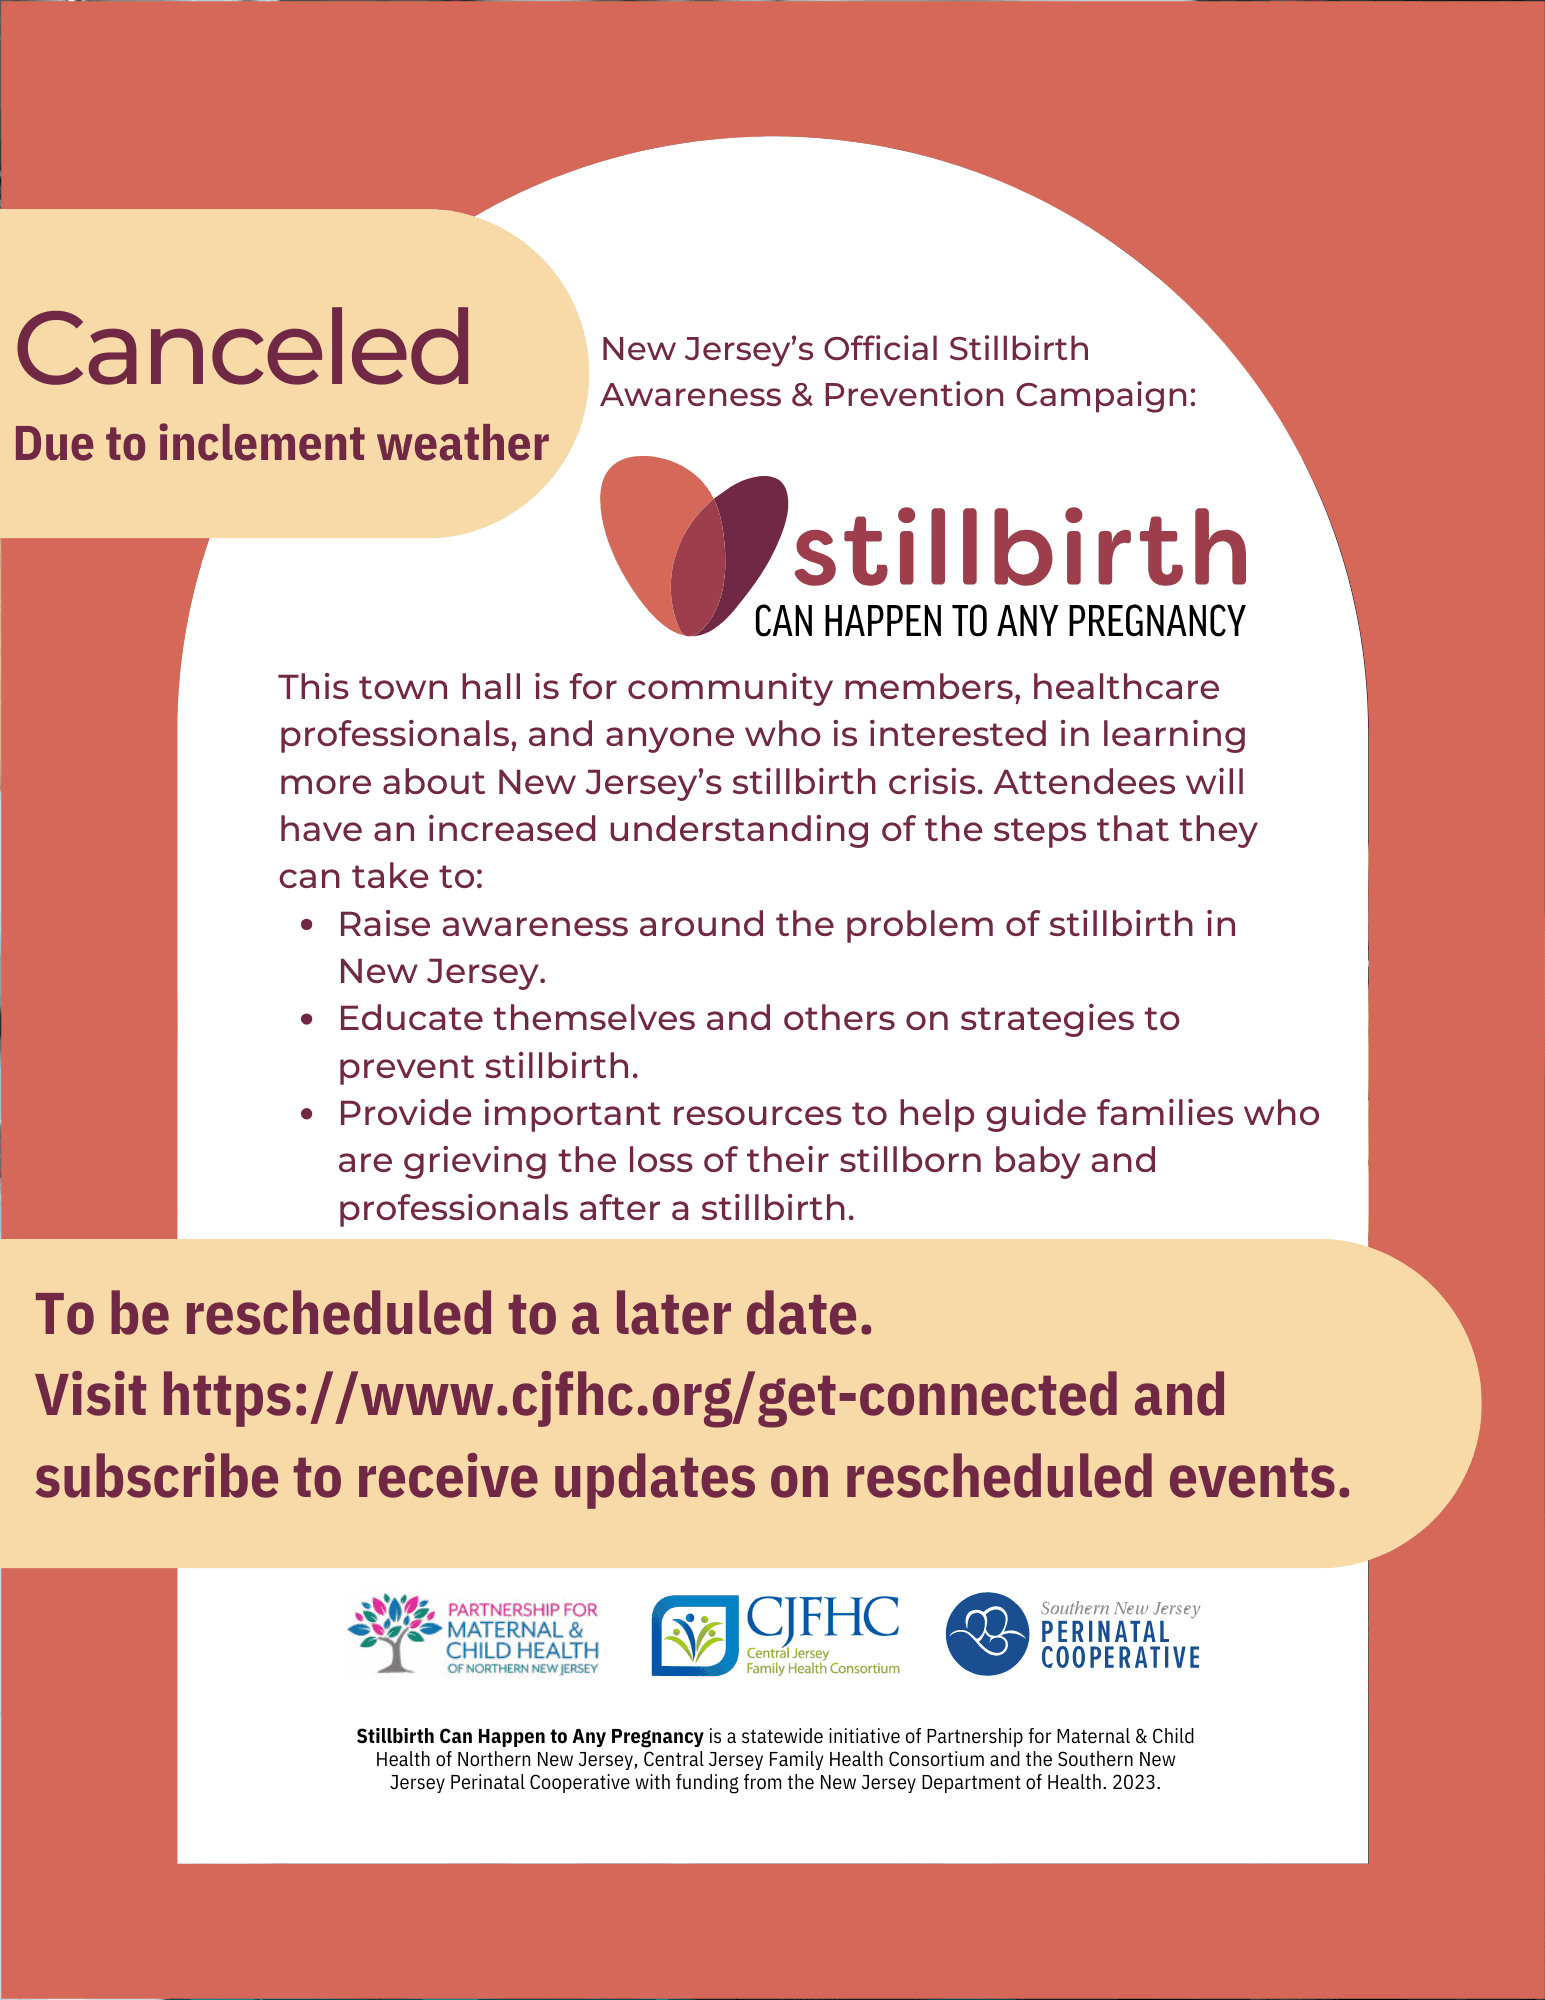 This town hall has been canceled due to inclement weather. Please visit our website, https://www.cjfhc.org or subscribe to our email list at https://www.cjfhc.org/get-connected to receive updates on the rescheduled events.